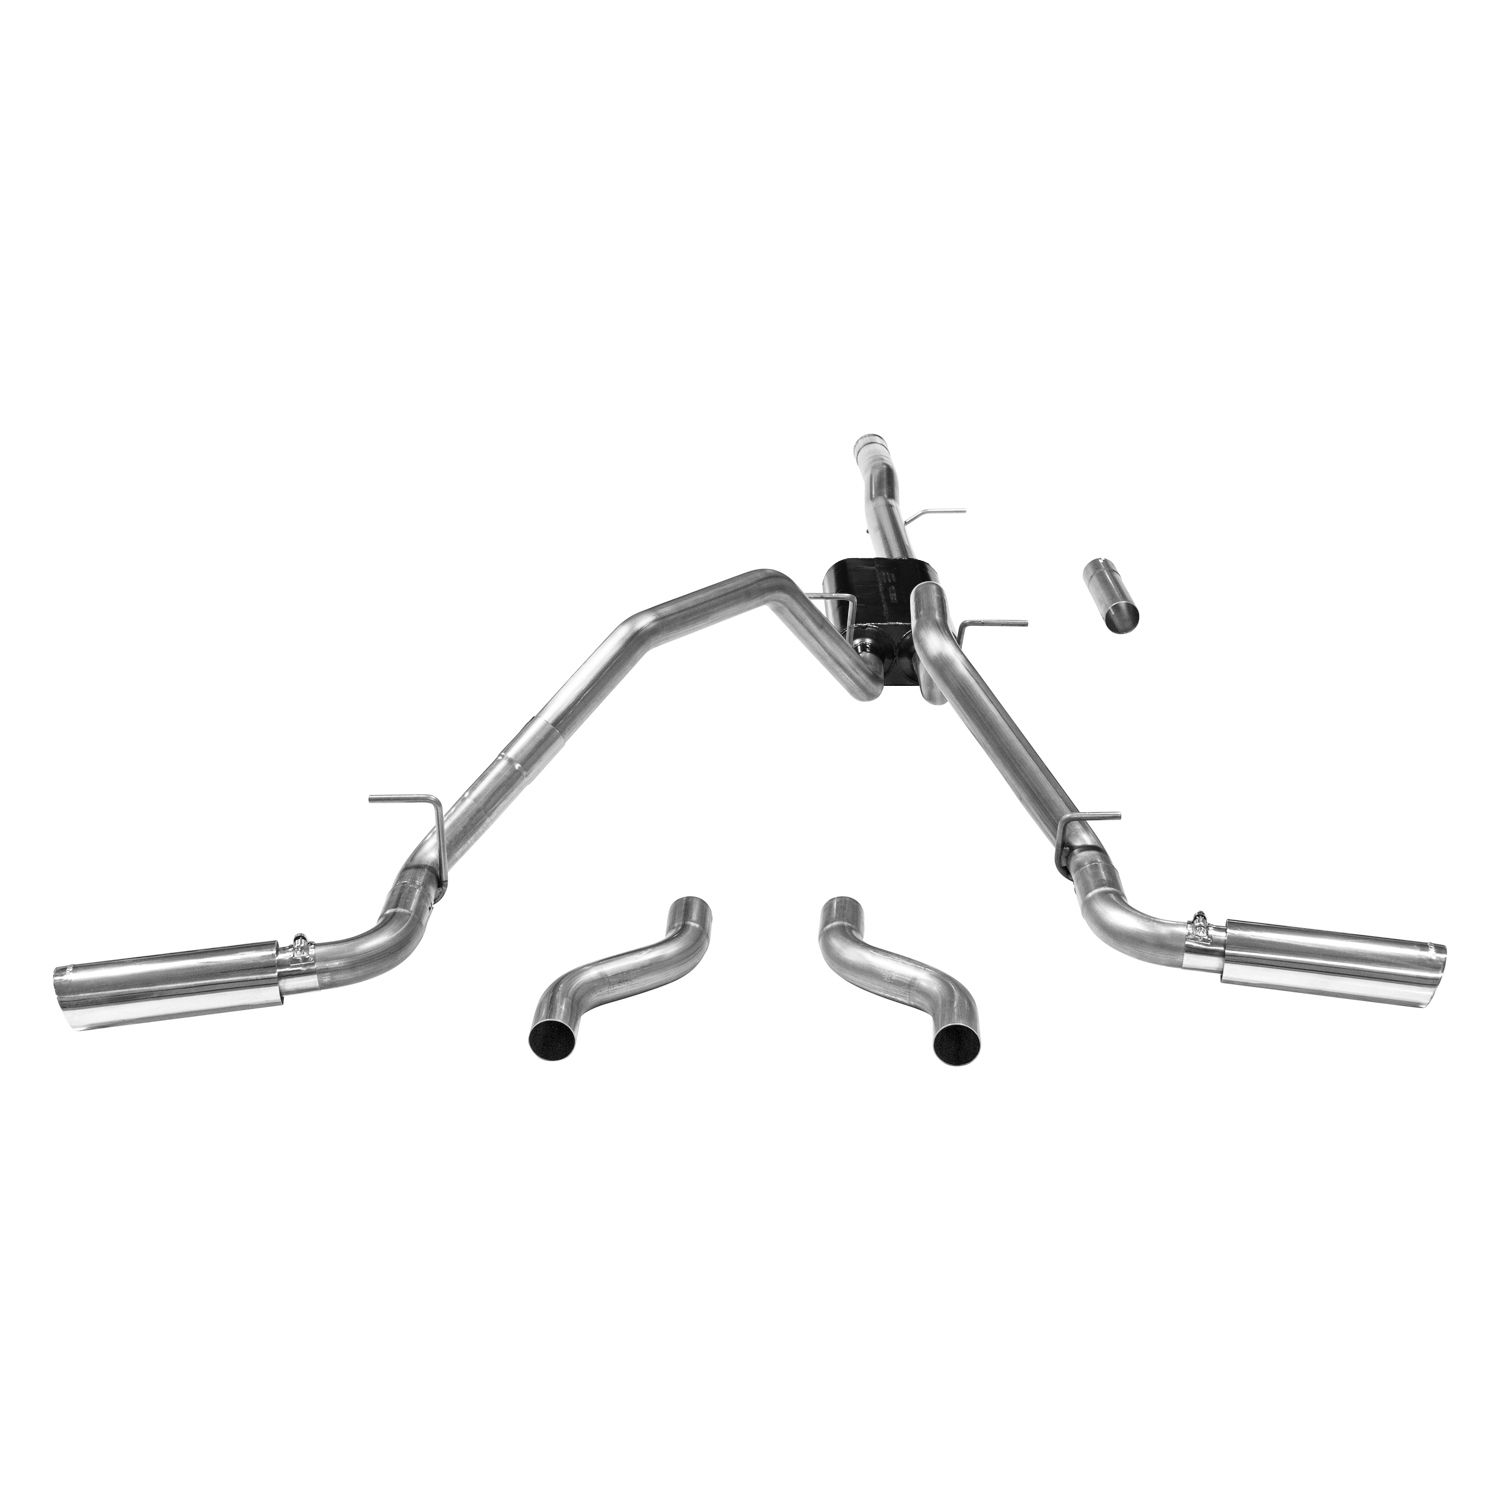 2014-2018 Chevrolet Silverado 1500 High Country 6.2L Crew Cab Flowmaster American Thunder Cat-Back Exhaust 69.3 inch Bed - 817602